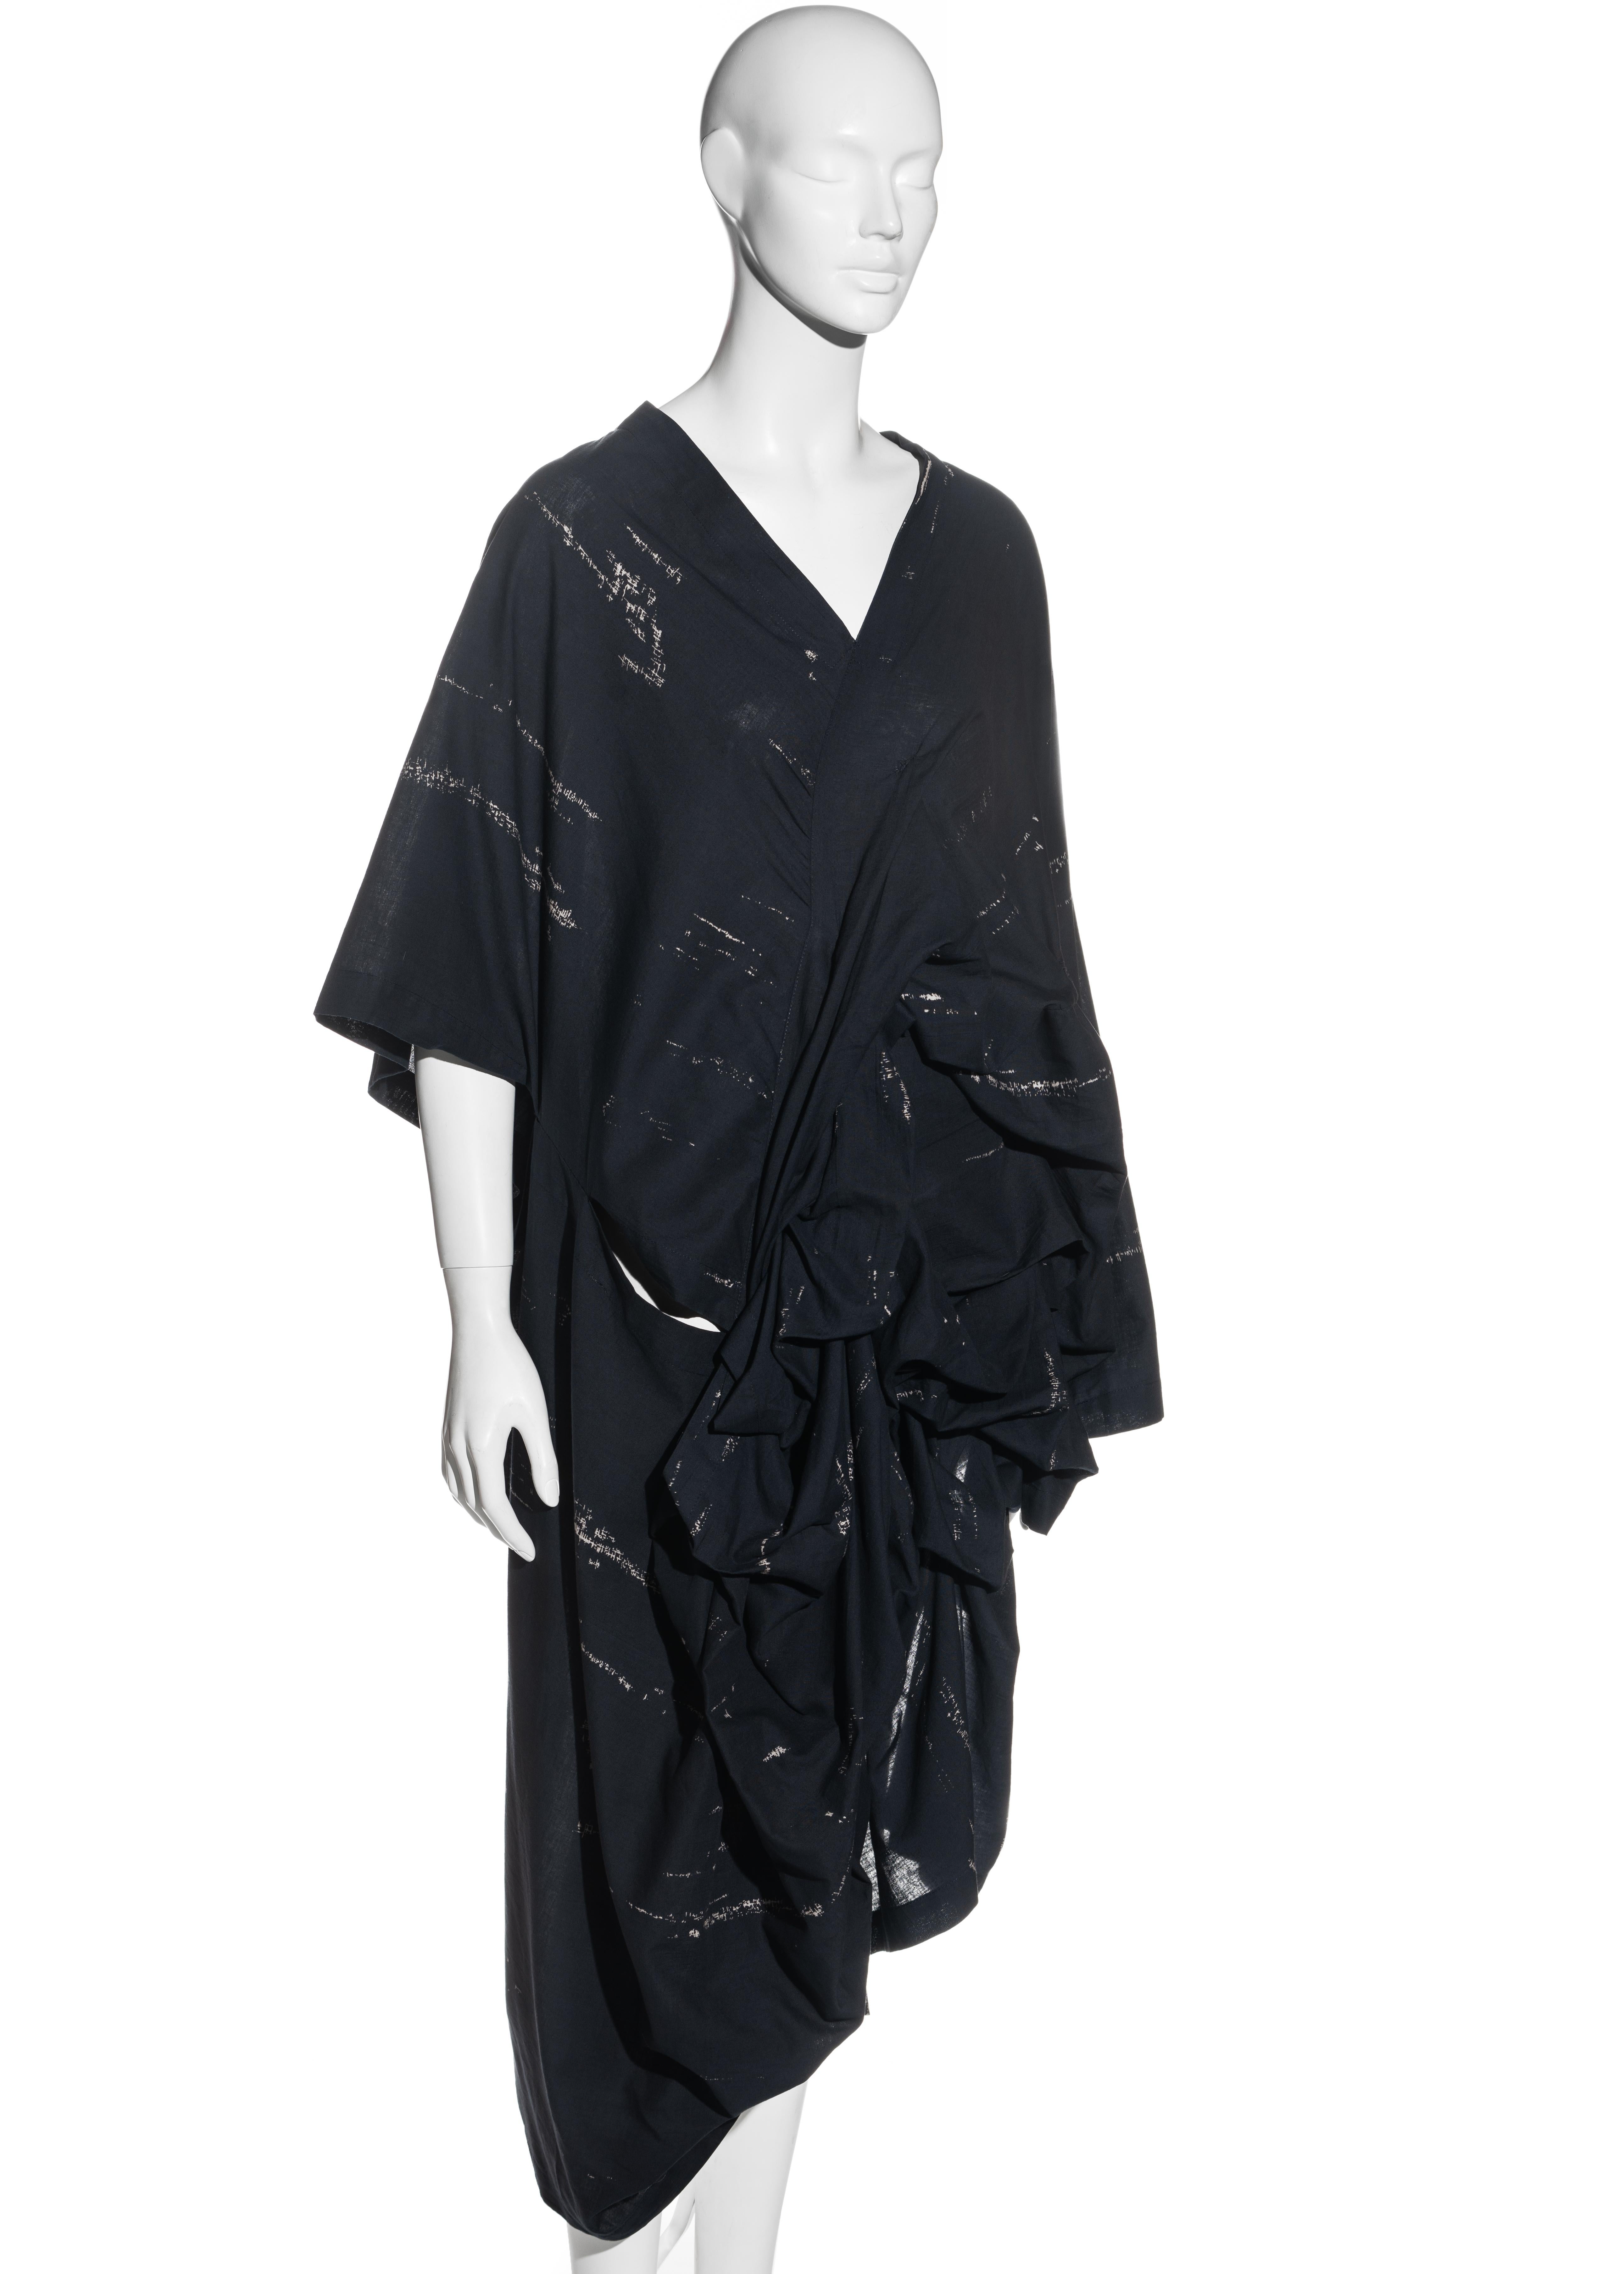 ▪ Comme des Garcons cotton tunic-like dress
▪ Navy blue ground with white brush stroke-like print
▪ Slit armholes
▪ Irregular stitches at the front creating a gathered effect 
▪ One Size
▪ Spring-Summer 1984